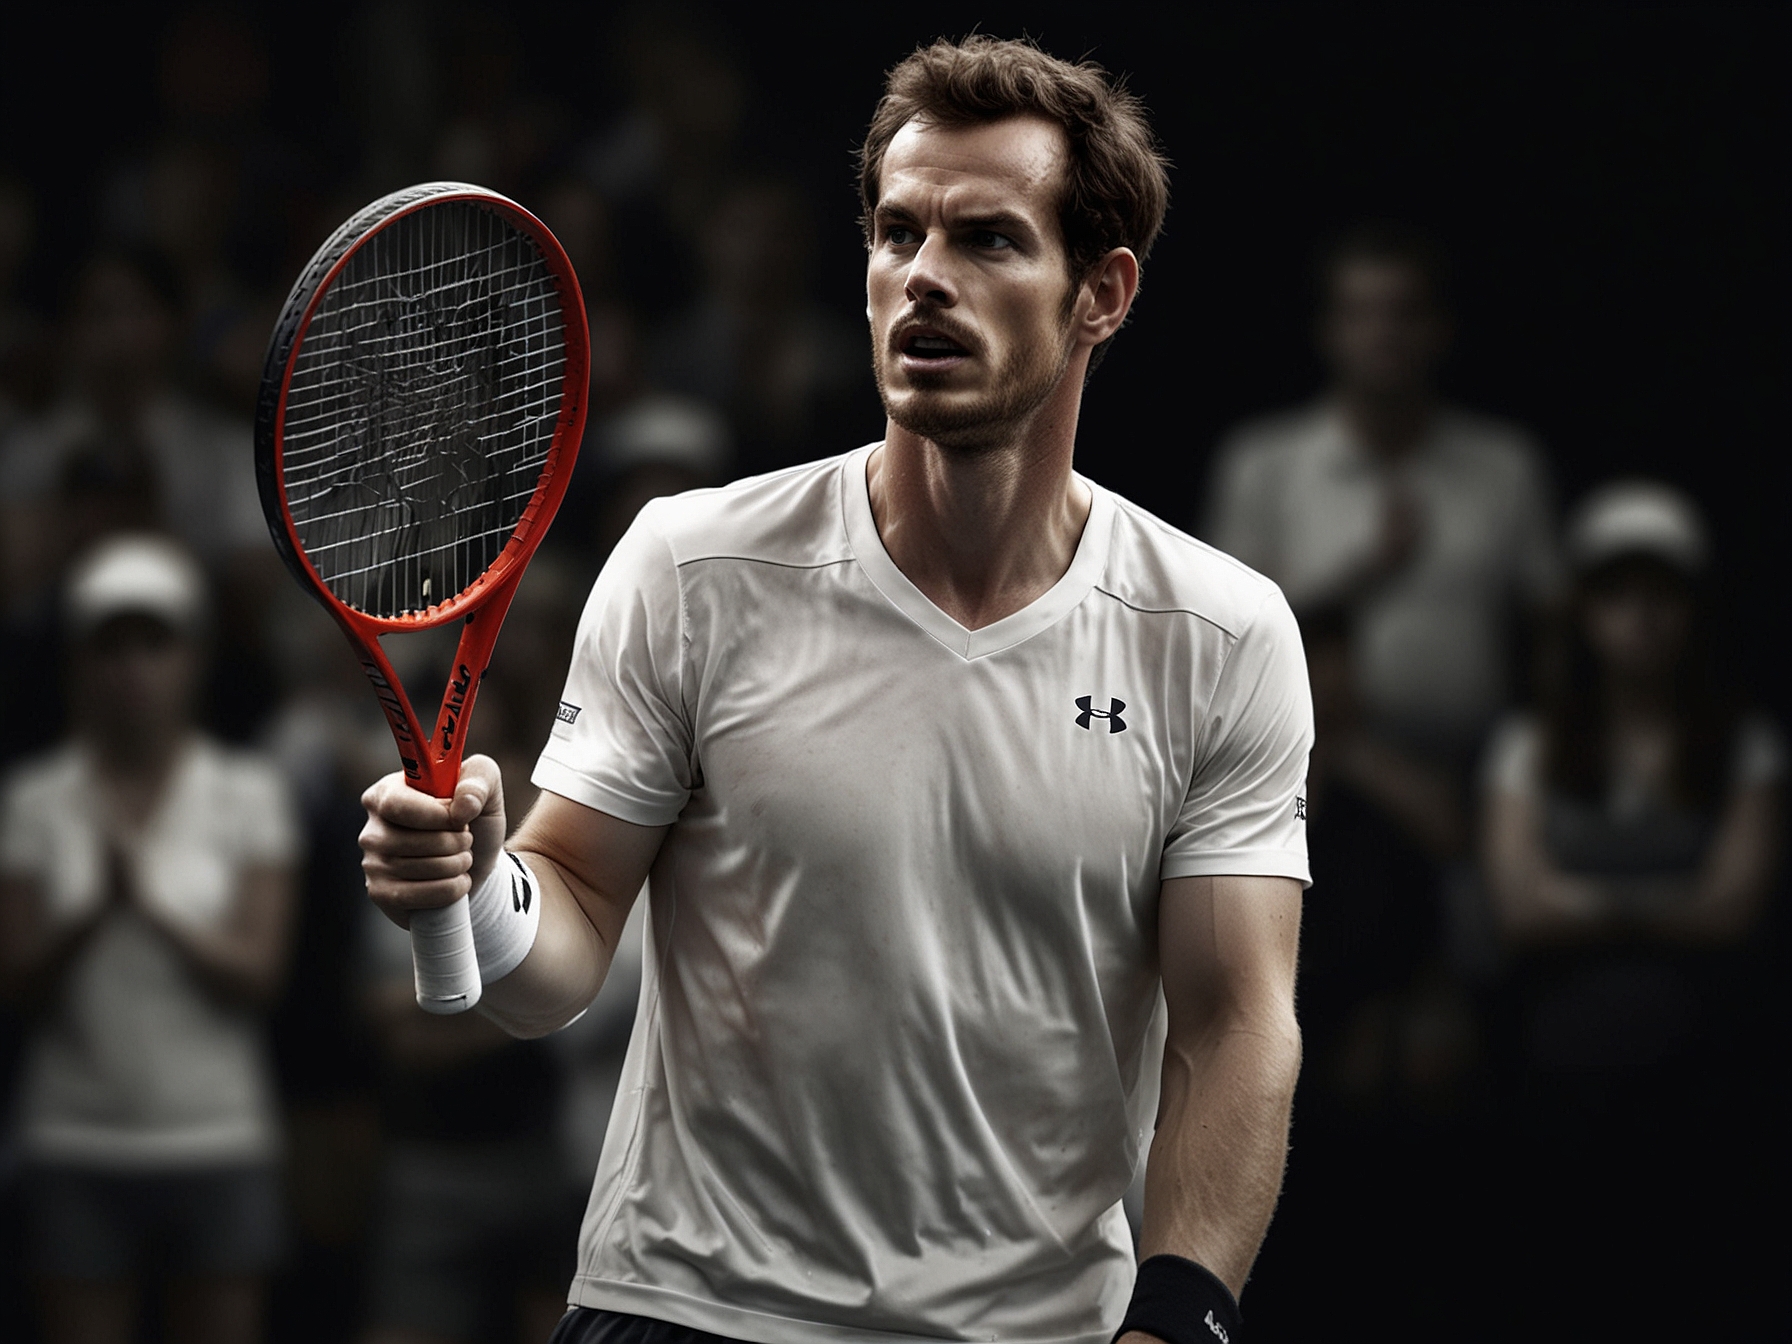 Andy Murray looking determined during a tennis match, symbolizing his resilience and fighting spirit despite facing ongoing injury challenges.